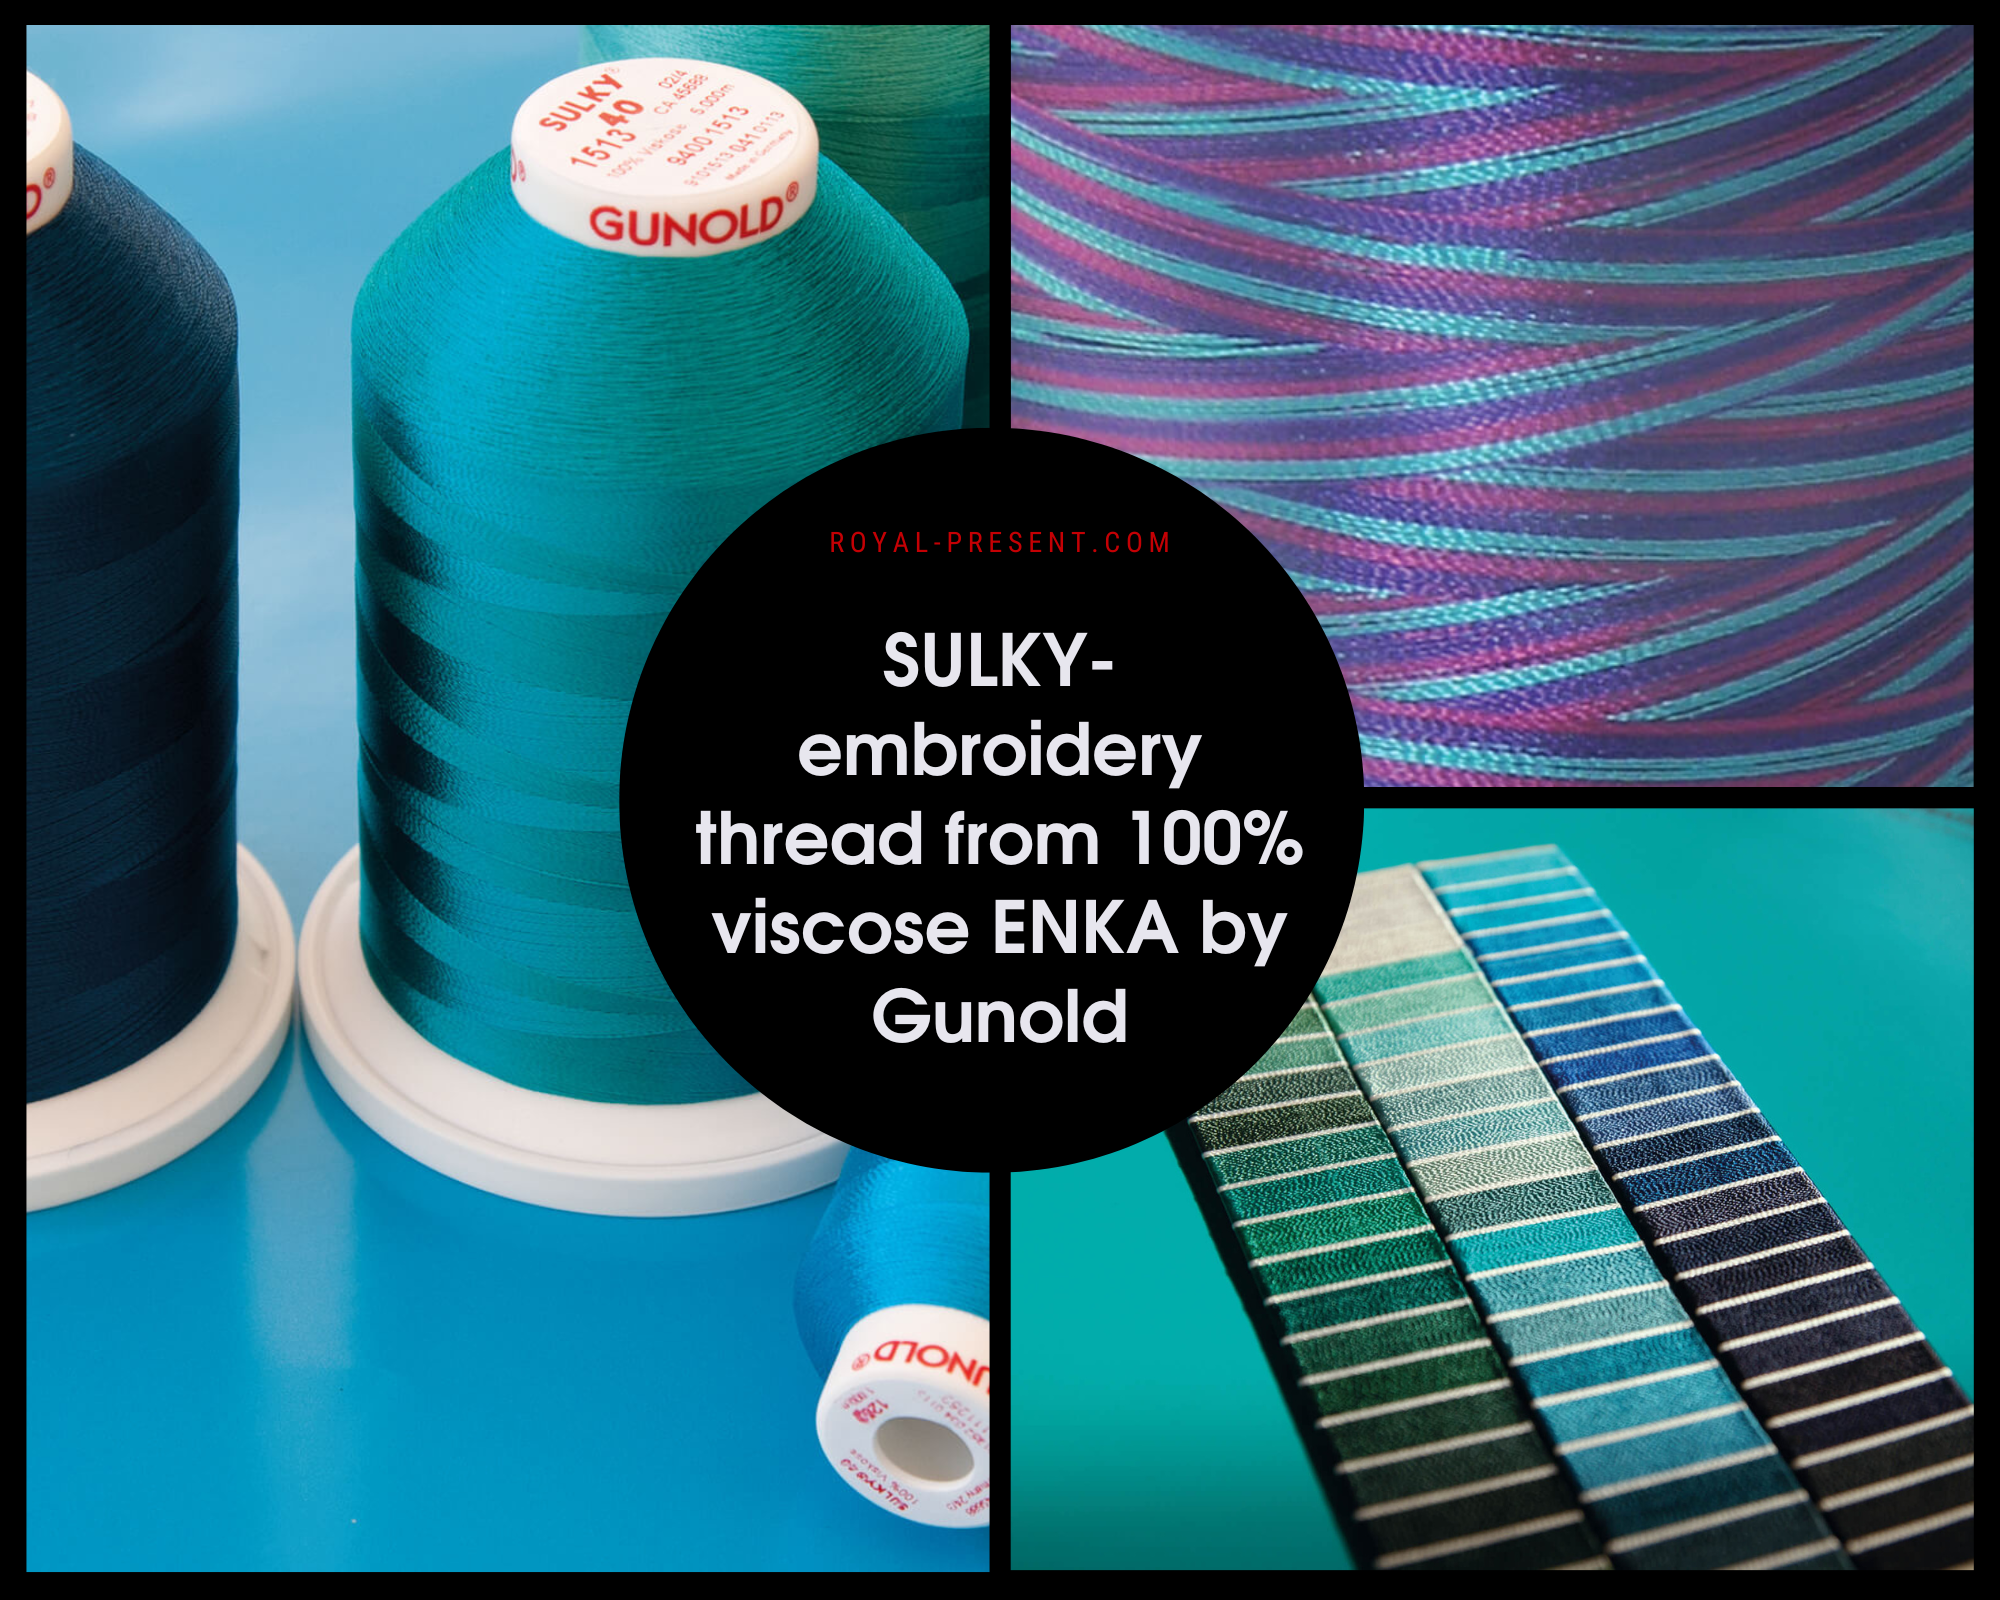 SULKY-embroidery thread